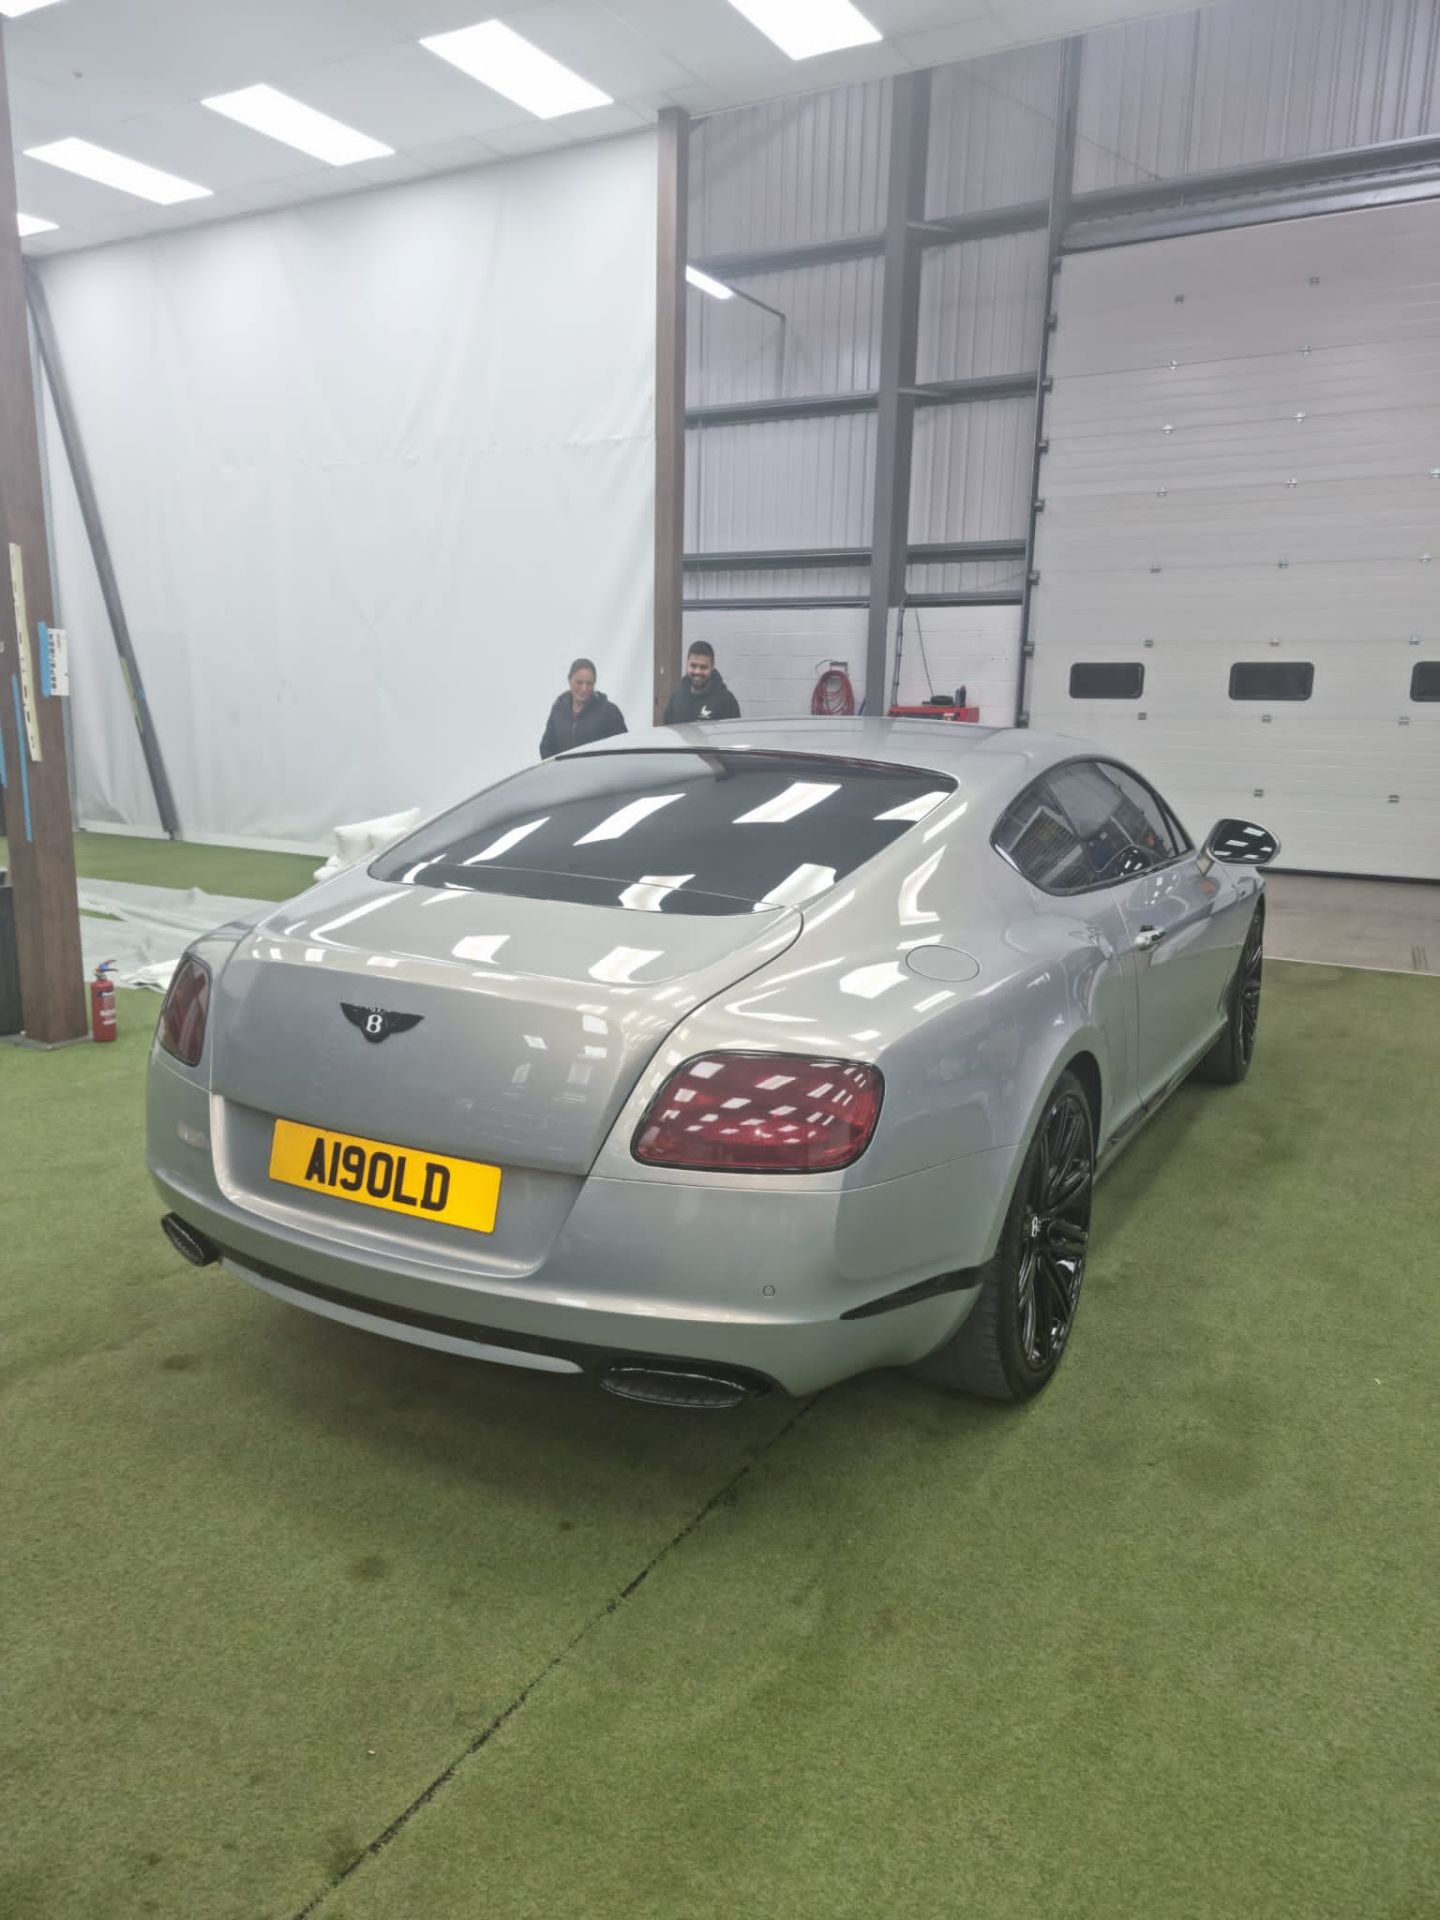 DCL - 2013 BENTLEY CONTINENTAL GT SPEED AUTO GREY COUPE, 56k miles, 626 BHP, 5998 cc PETROL - Image 6 of 16